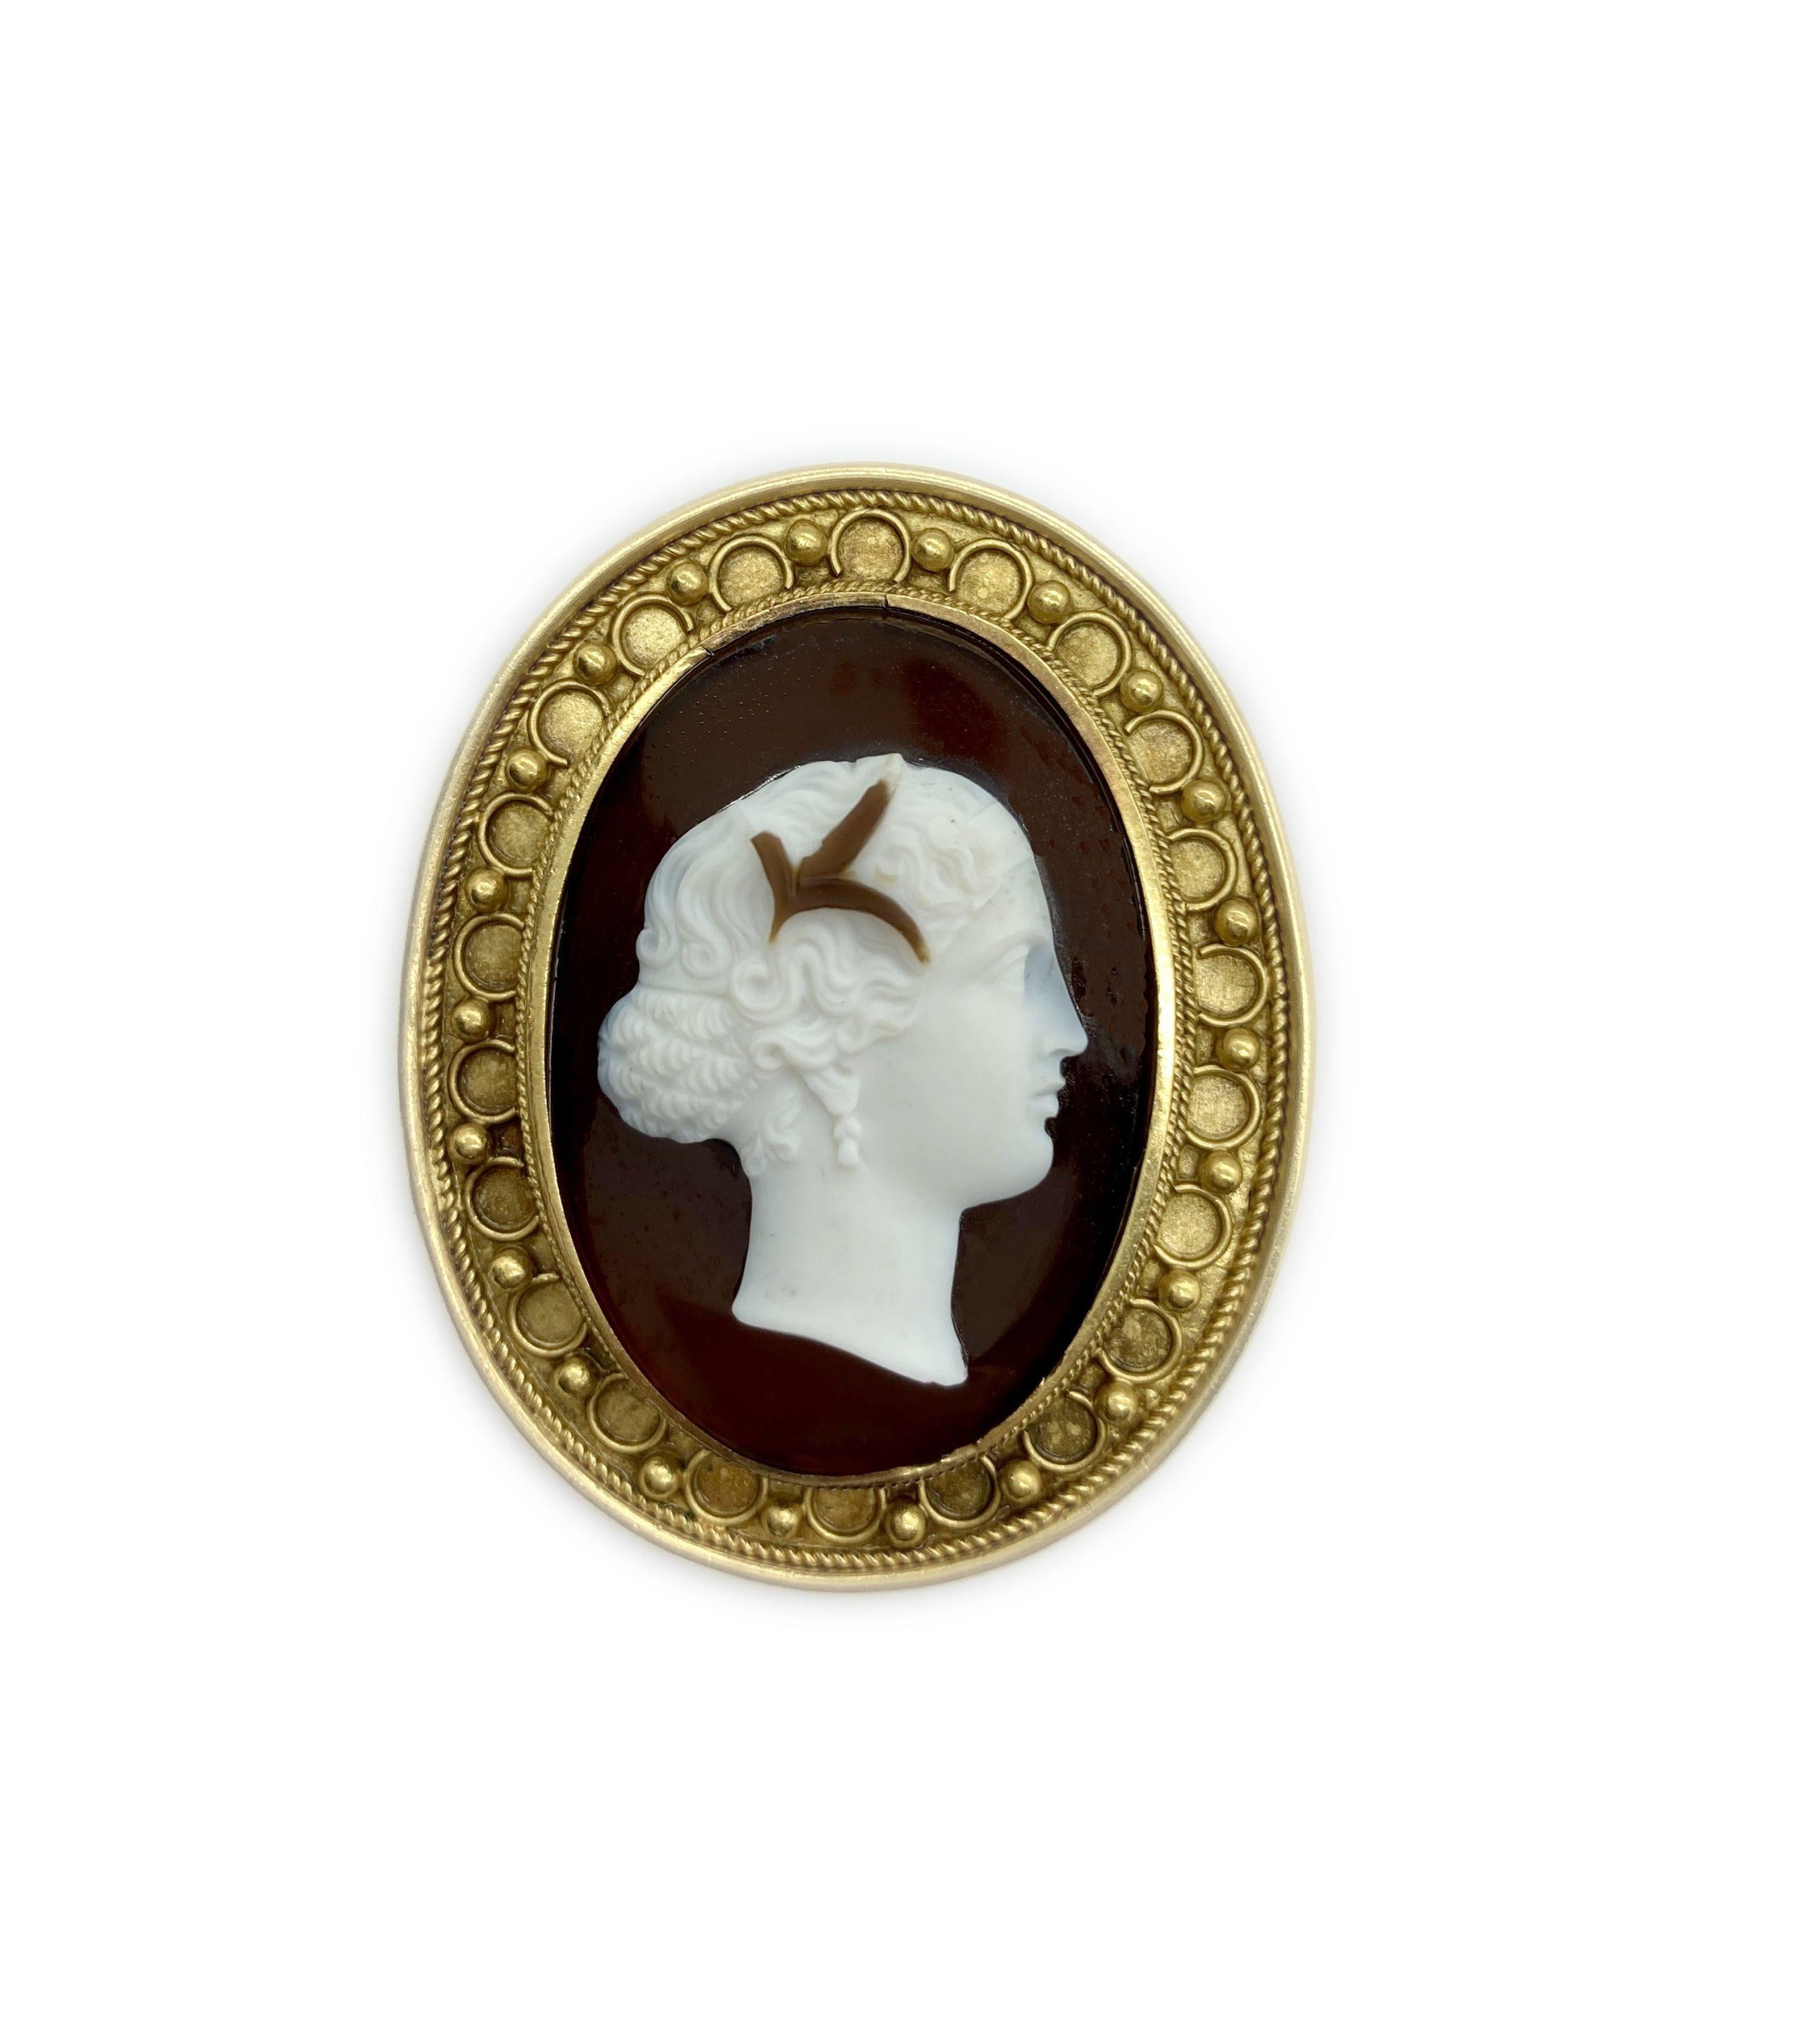 where to find ivory coin brooch